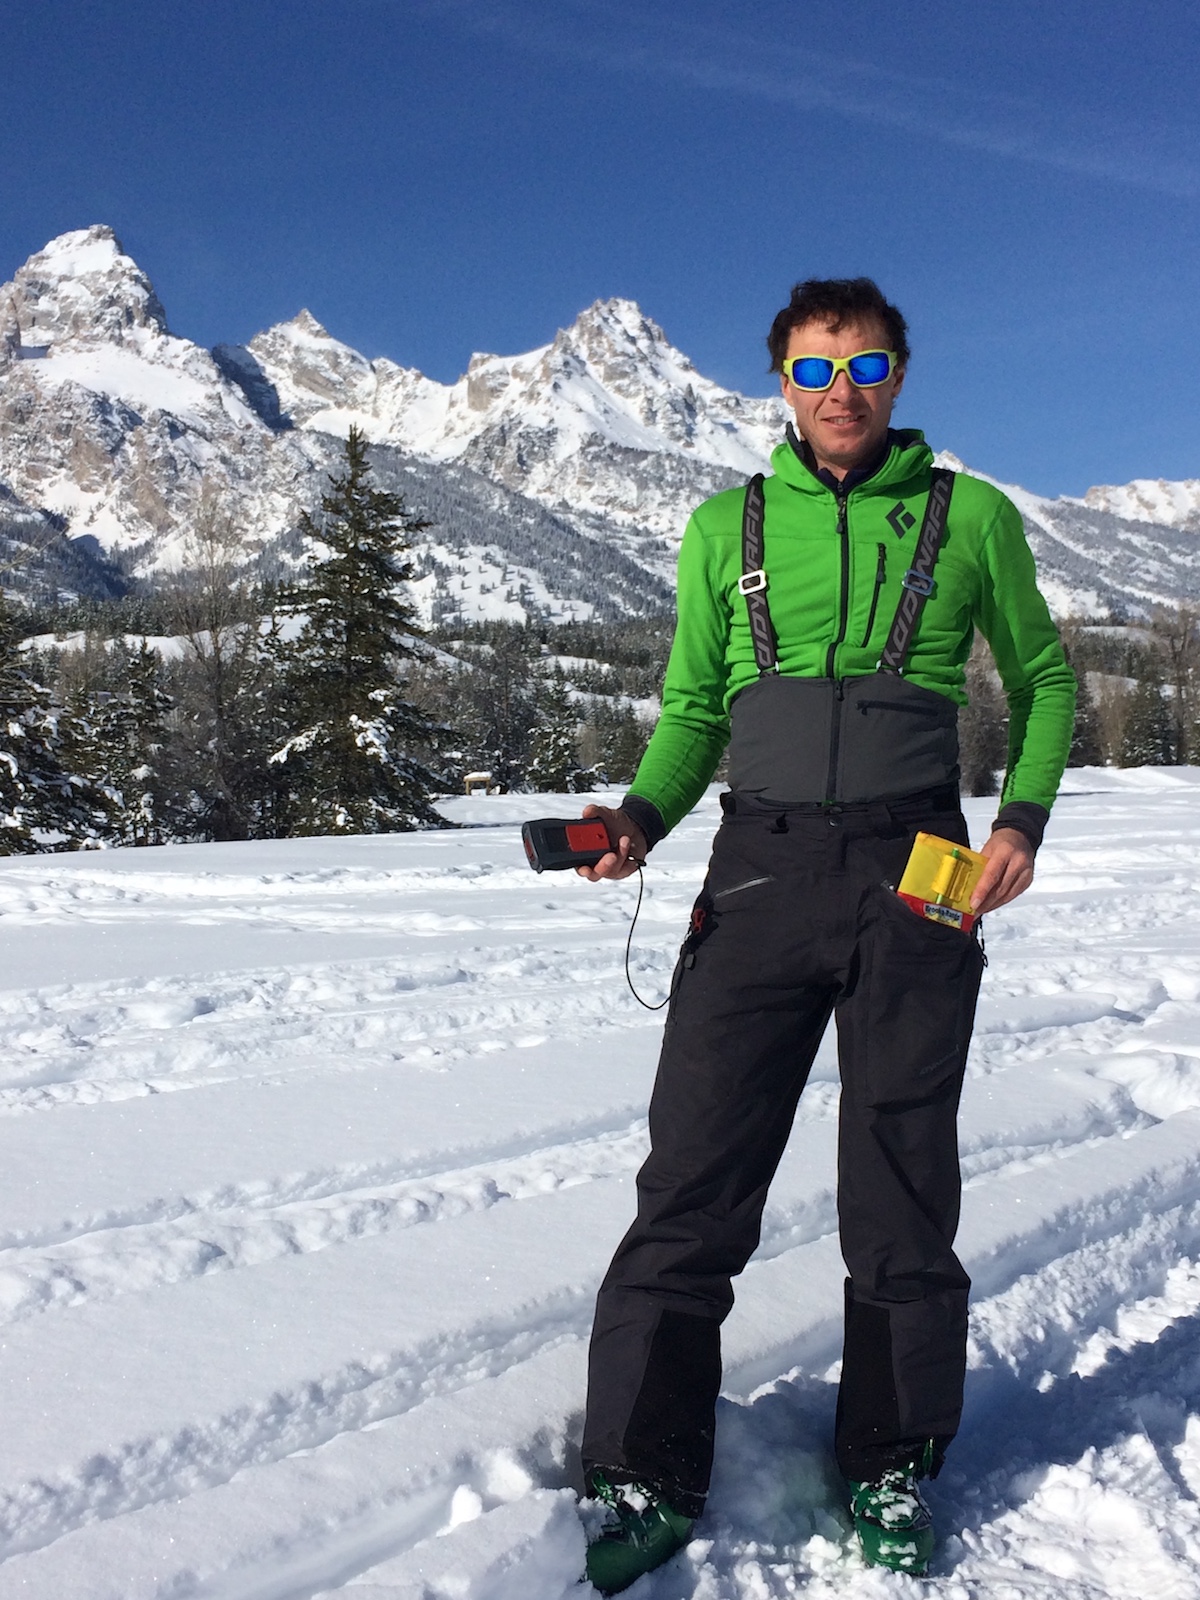 Mike Lewis demonstrates the compatibility of the Yotei Pants with an avalanche transceiver and field book during a trip to the Tetons in Wyoming. [Photo] Chris Brown